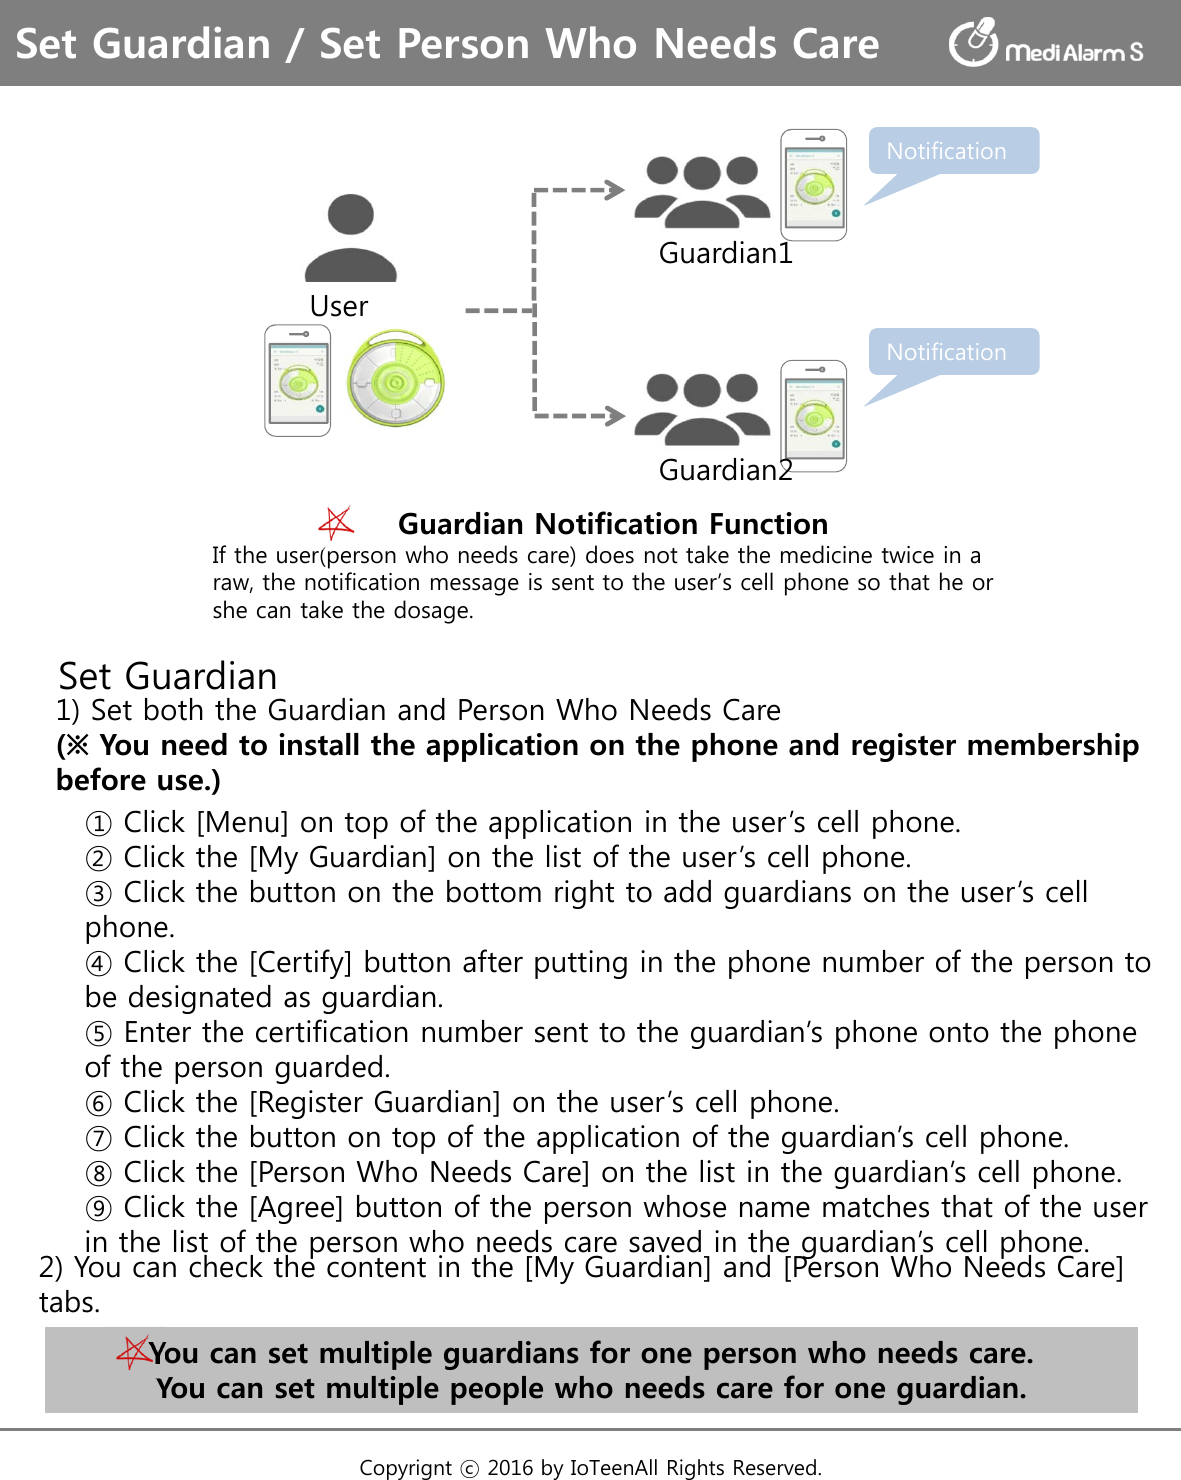 You can set multiple guardians for one person who needs care.You can set multiple people who needs care for one guardian.Guardian Notification FunctionIf the user(person who needs care) does not take the medicine twice in a raw, the notification message is sent to the user’s cell phone so that he or she can take the dosage. User Guardian1Guardian2NotificationSet Guardian / Set Person Who Needs CareCopyrignt ⓒ 2016 by IoTeenAll Rights Reserved. ① Click [Menu] on top of the application in the user’s cell phone.② Click the [My Guardian] on the list of the user’s cell phone.③ Click the button on the bottom right to add guardians on the user’s cell phone.④ Click the [Certify] button after putting in the phone number of the person to be designated as guardian.⑤ Enter the certification number sent to the guardian’s phone onto the phone of the person guarded.⑥ Click the [Register Guardian] on the user’s cell phone.⑦ Click the button on top of the application of the guardian’s cell phone.⑧ Click the [Person Who Needs Care] on the list in the guardian’s cell phone.⑨ Click the [Agree] button of the person whose name matches that of the user in the list of the person who needs care saved in the guardian’s cell phone.Set Guardian1) Set both the Guardian and Person Who Needs Care(※ You need to install the application on the phone and register membership before use.)2) You can check the content in the [My Guardian] and [Person Who Needs Care] tabs. Notification